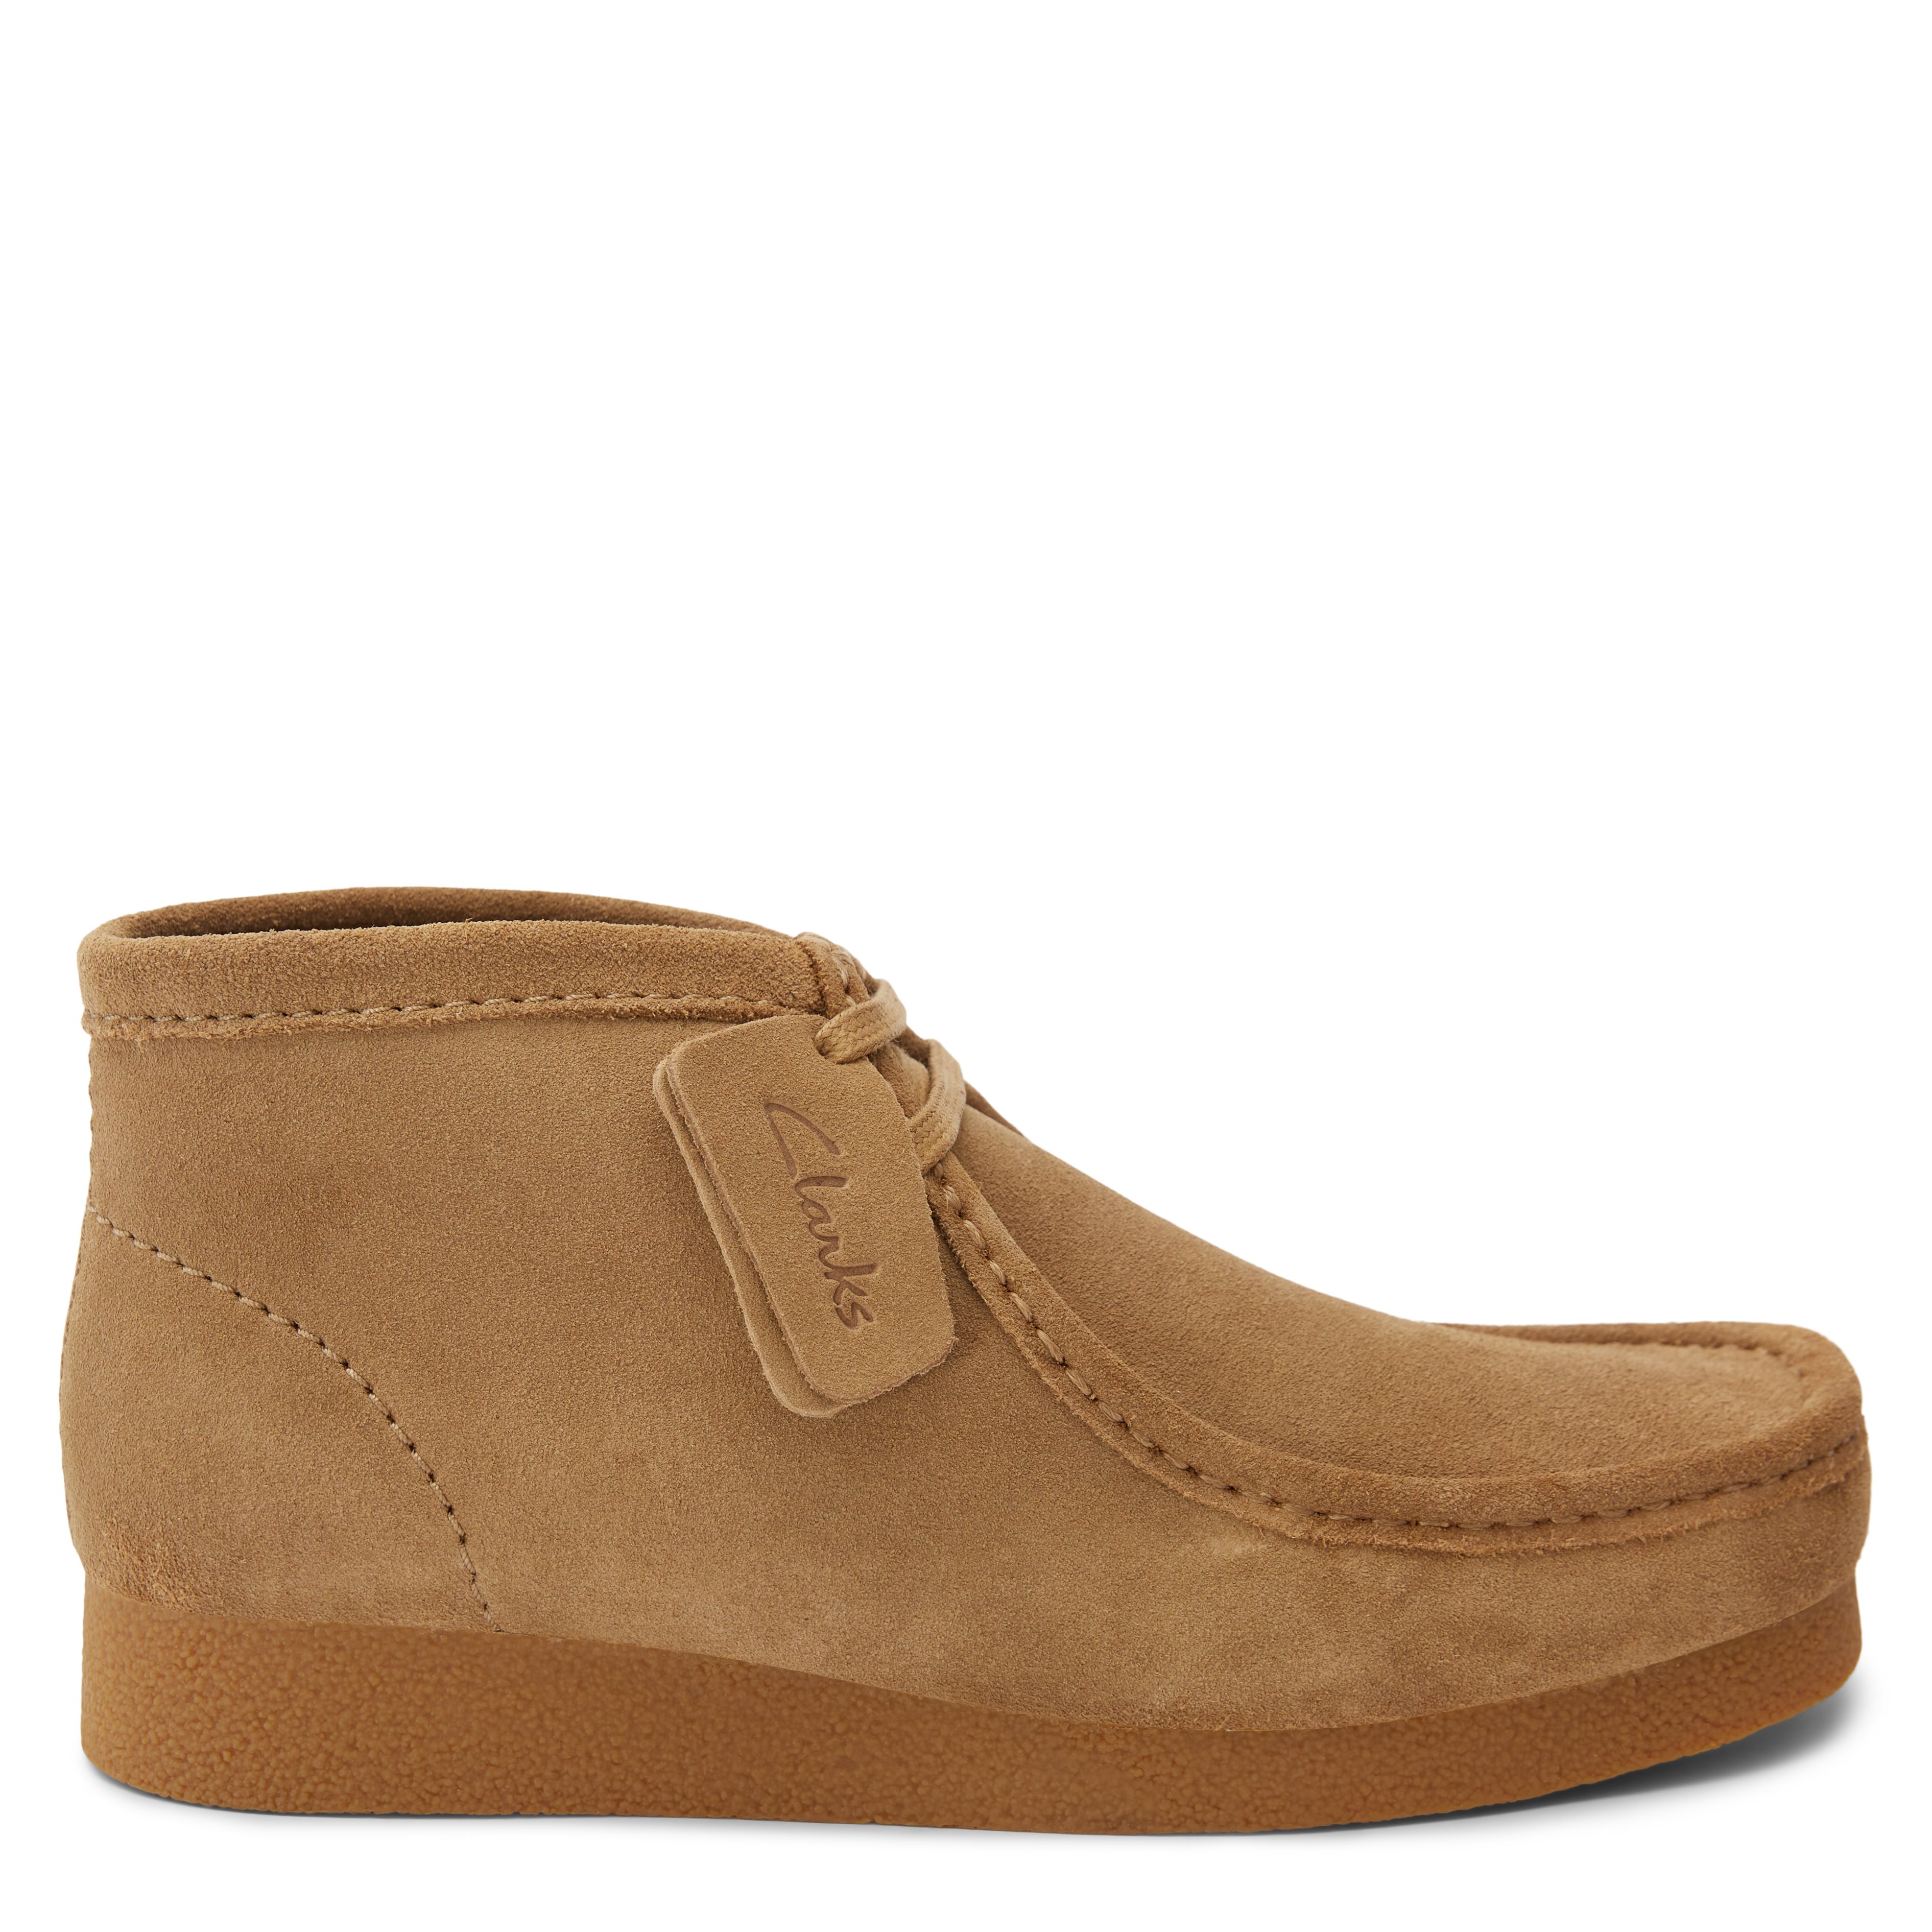 Clarks Shoes WALLABEE BOOT Sand